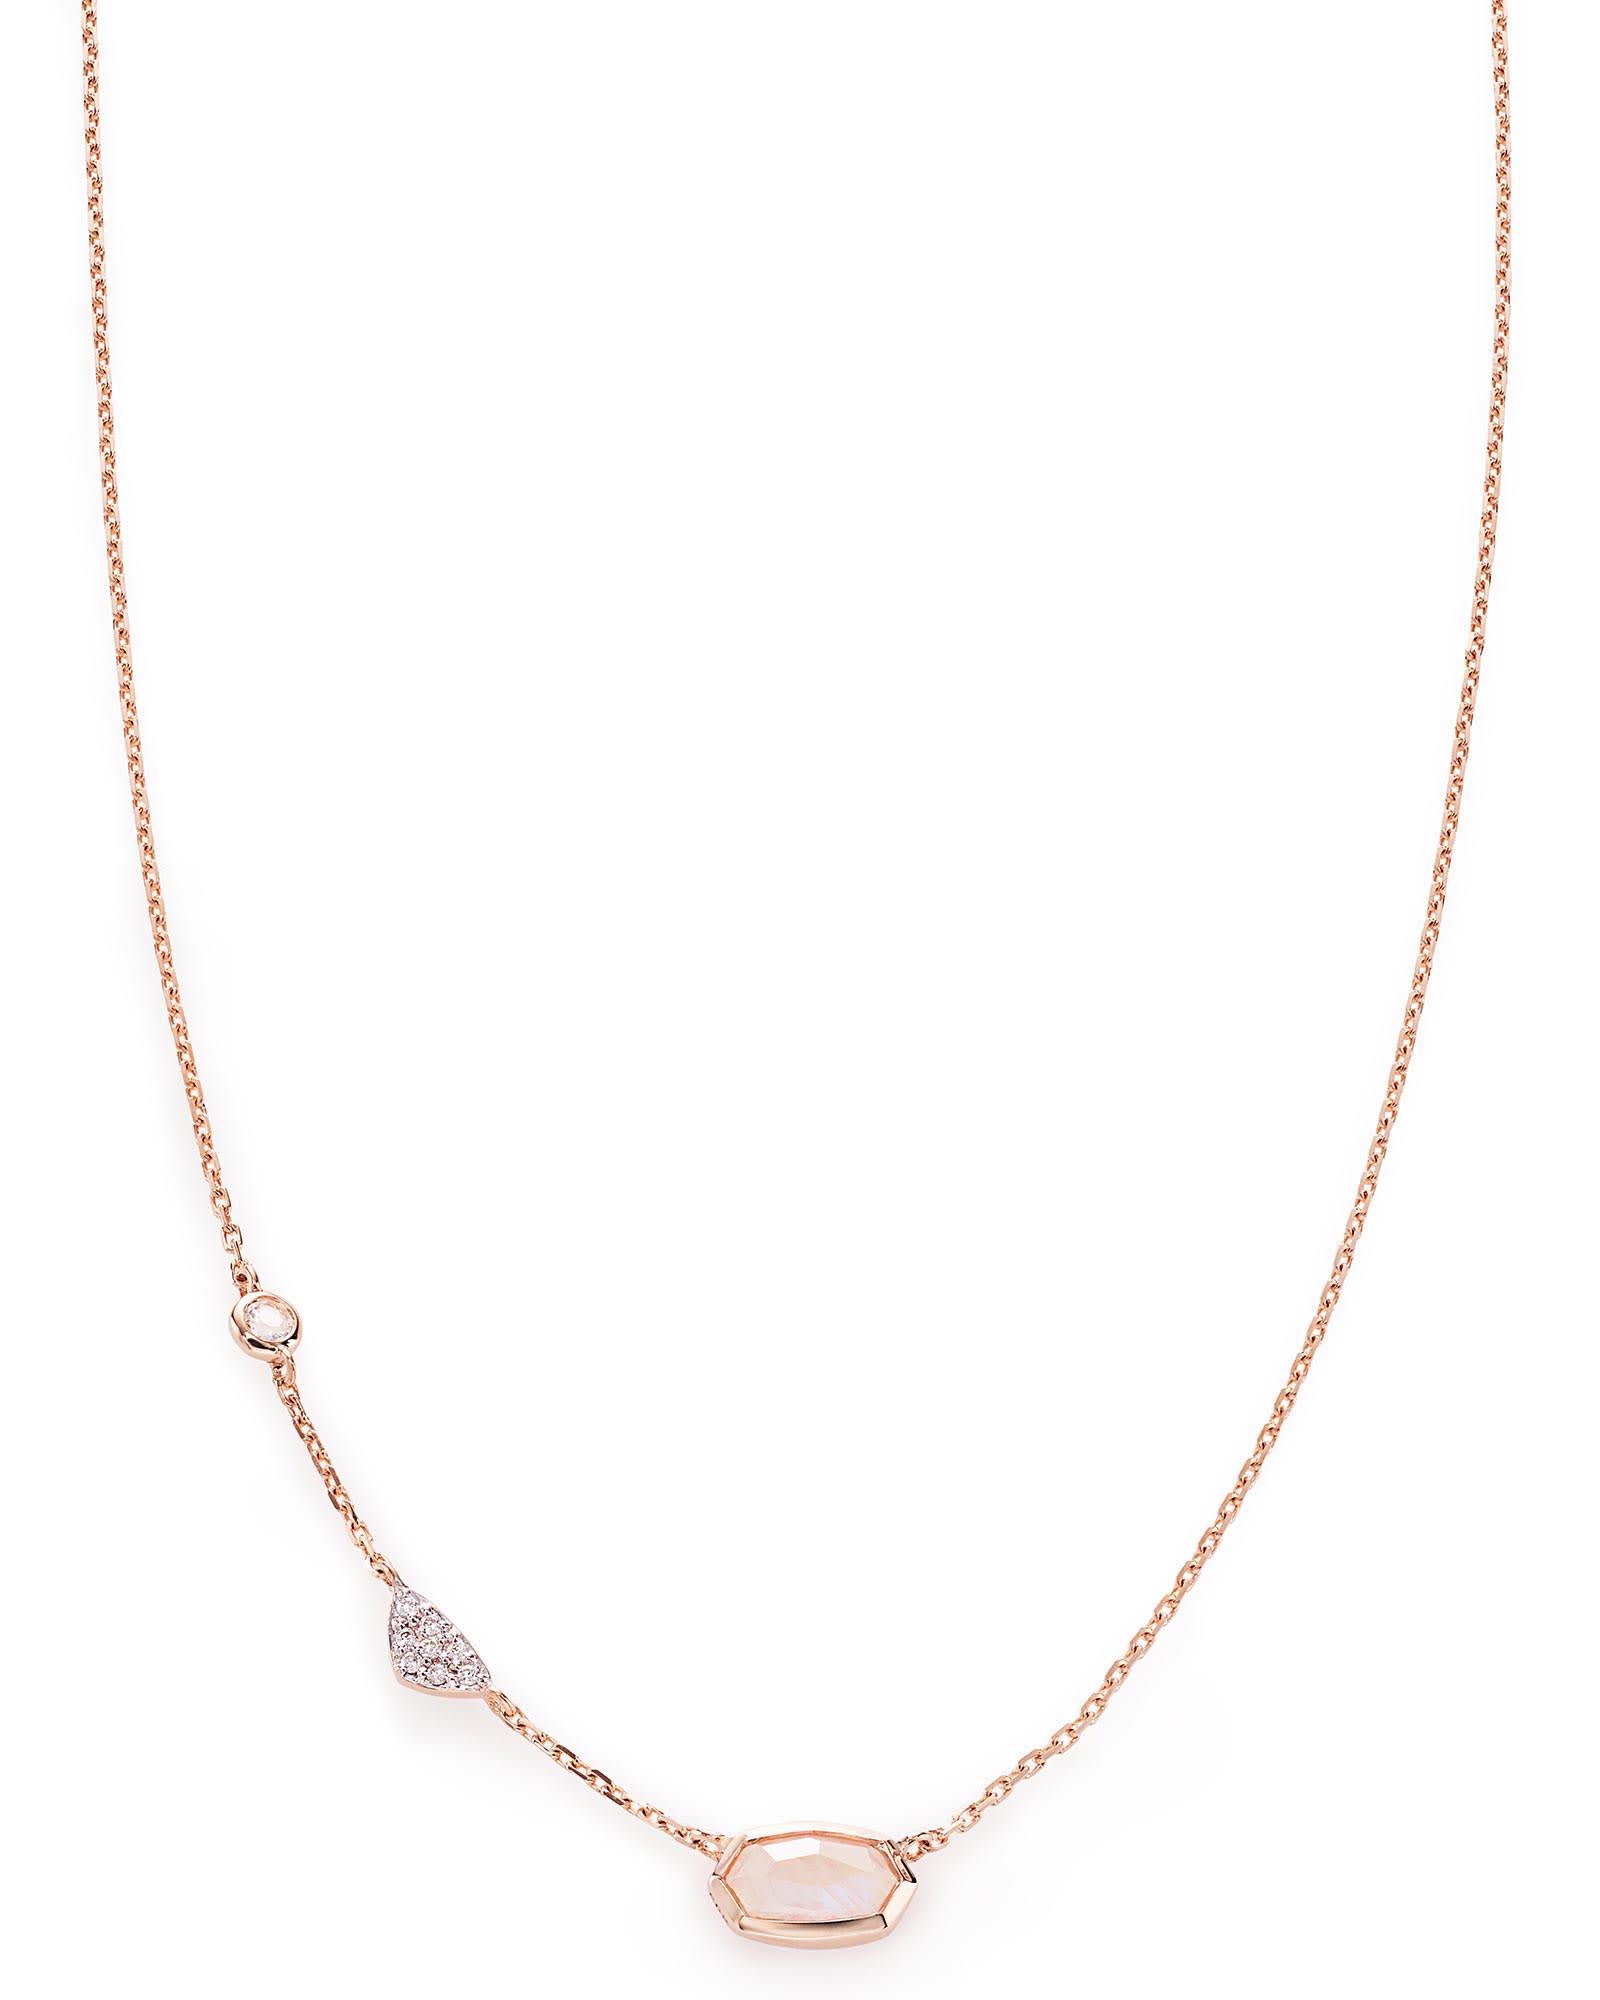 Aryn Pendant Necklace in Rainbow Moonstone and 14k Rose Gold